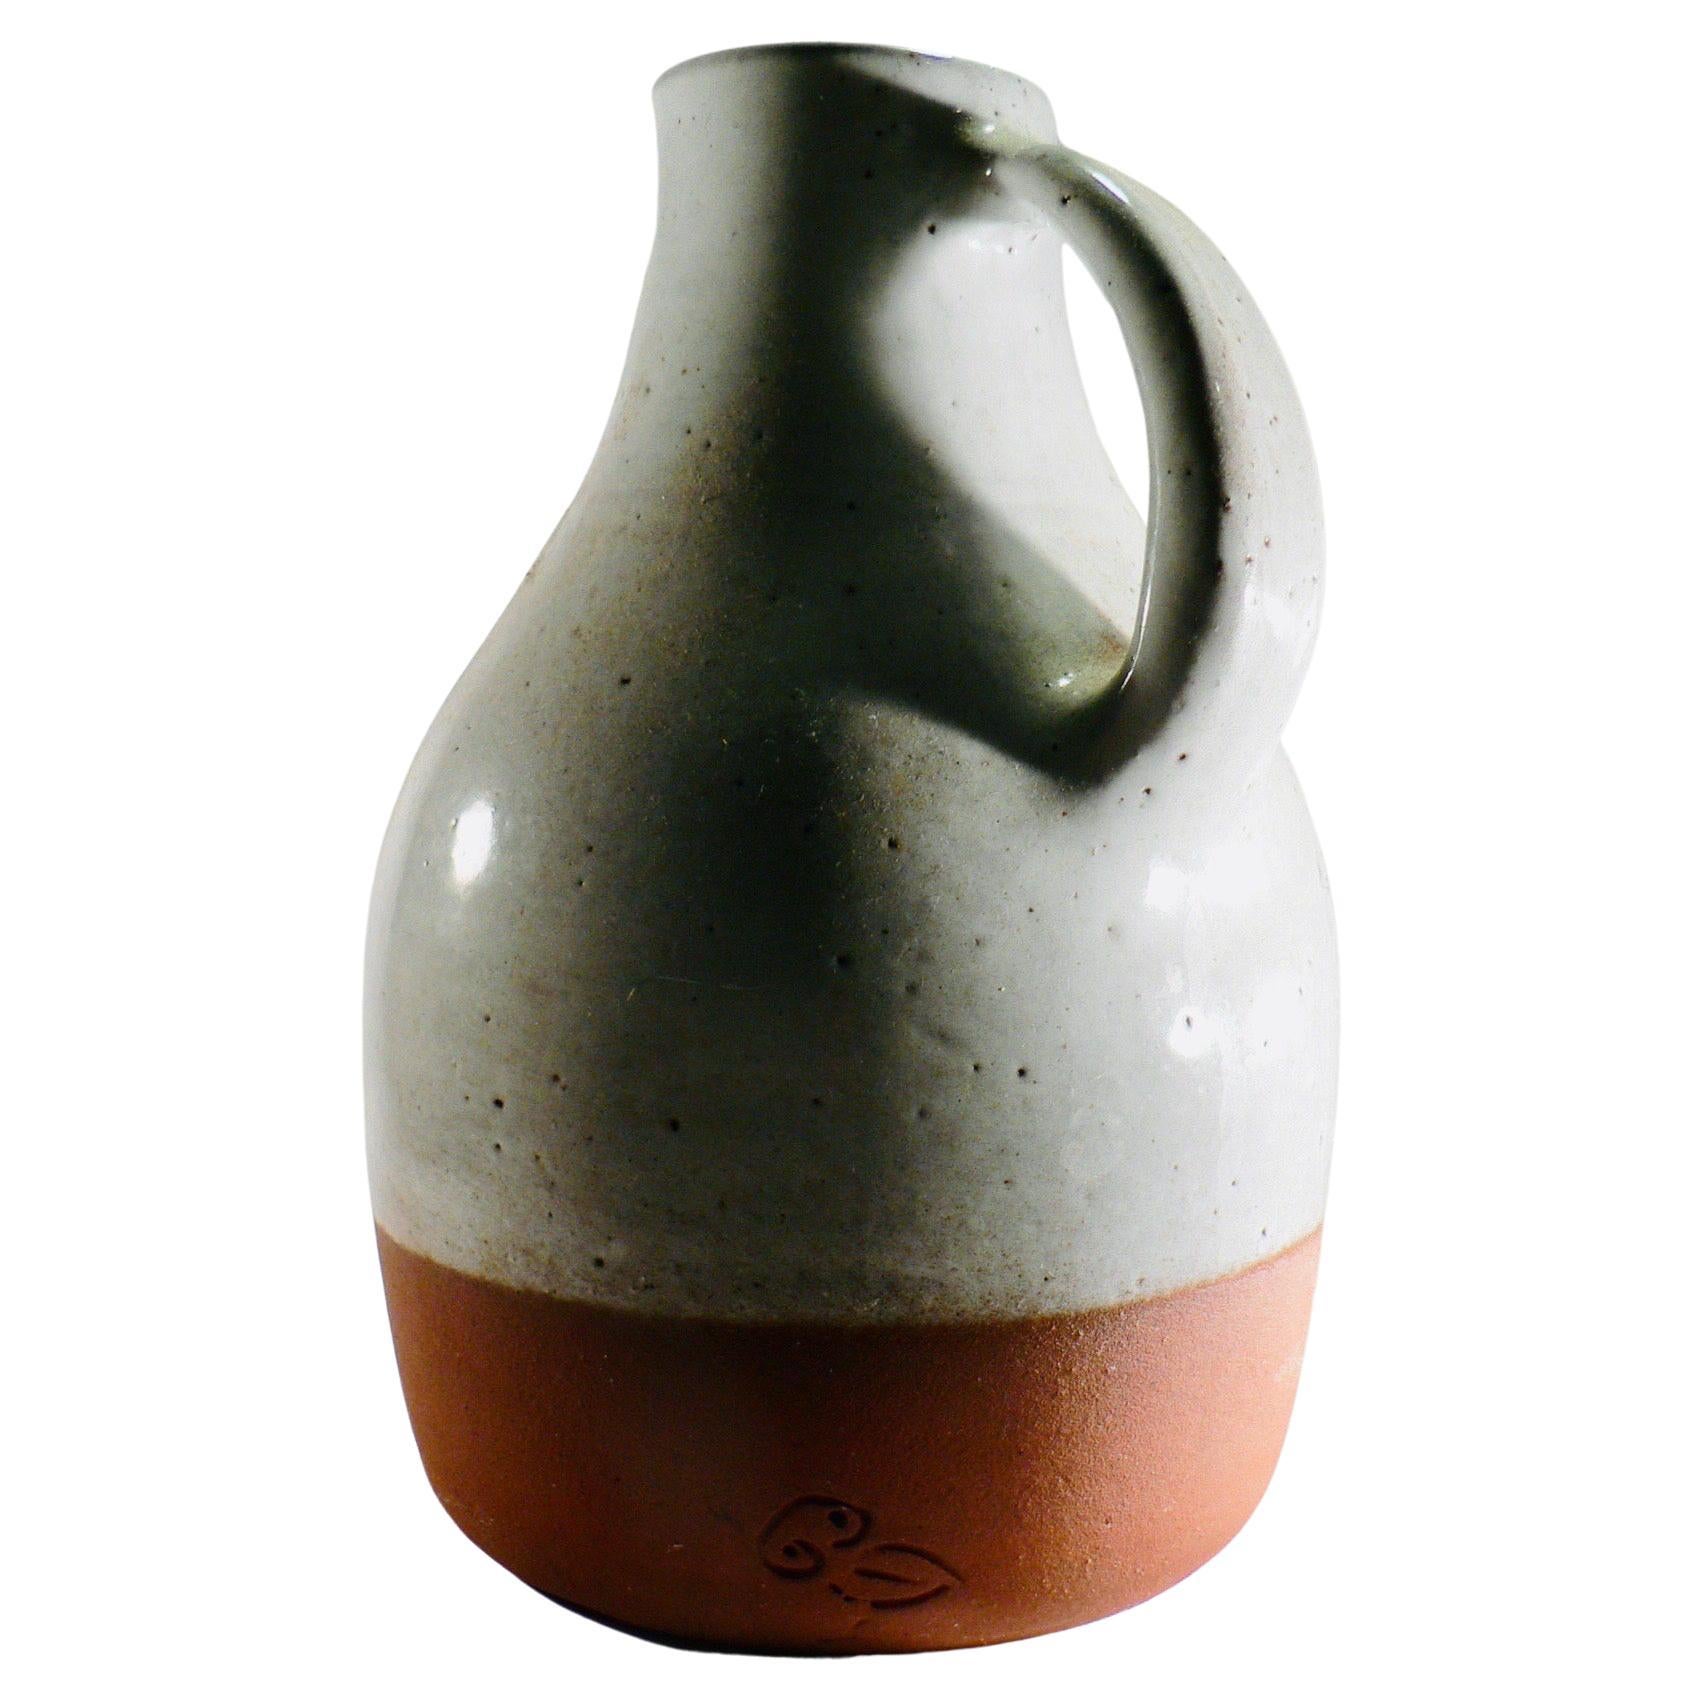 A pitcher in glazed ceramic - Jeanne and Norbert Pierlot - France - 1960s. For Sale